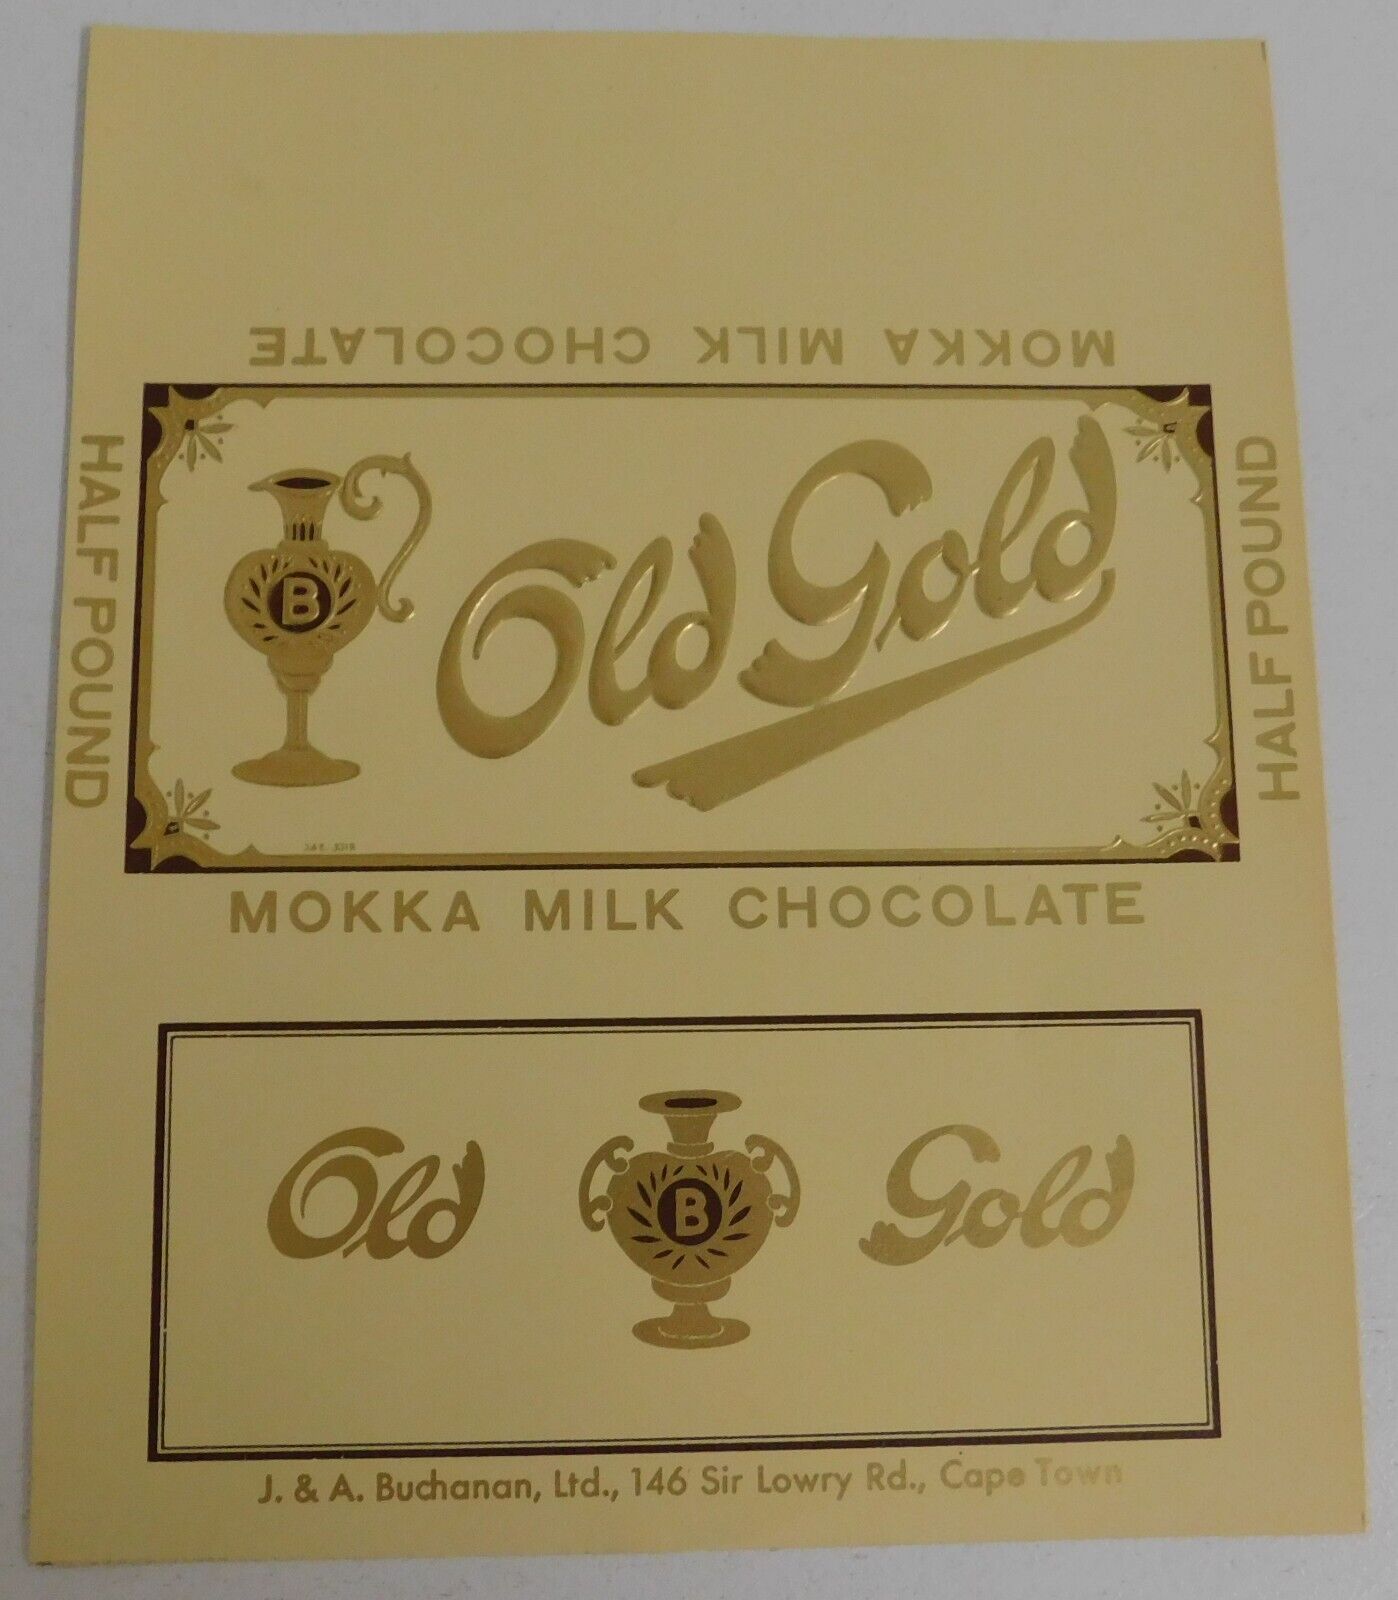 Vintage Old Gold Chocolate Label...Heavily Embossed